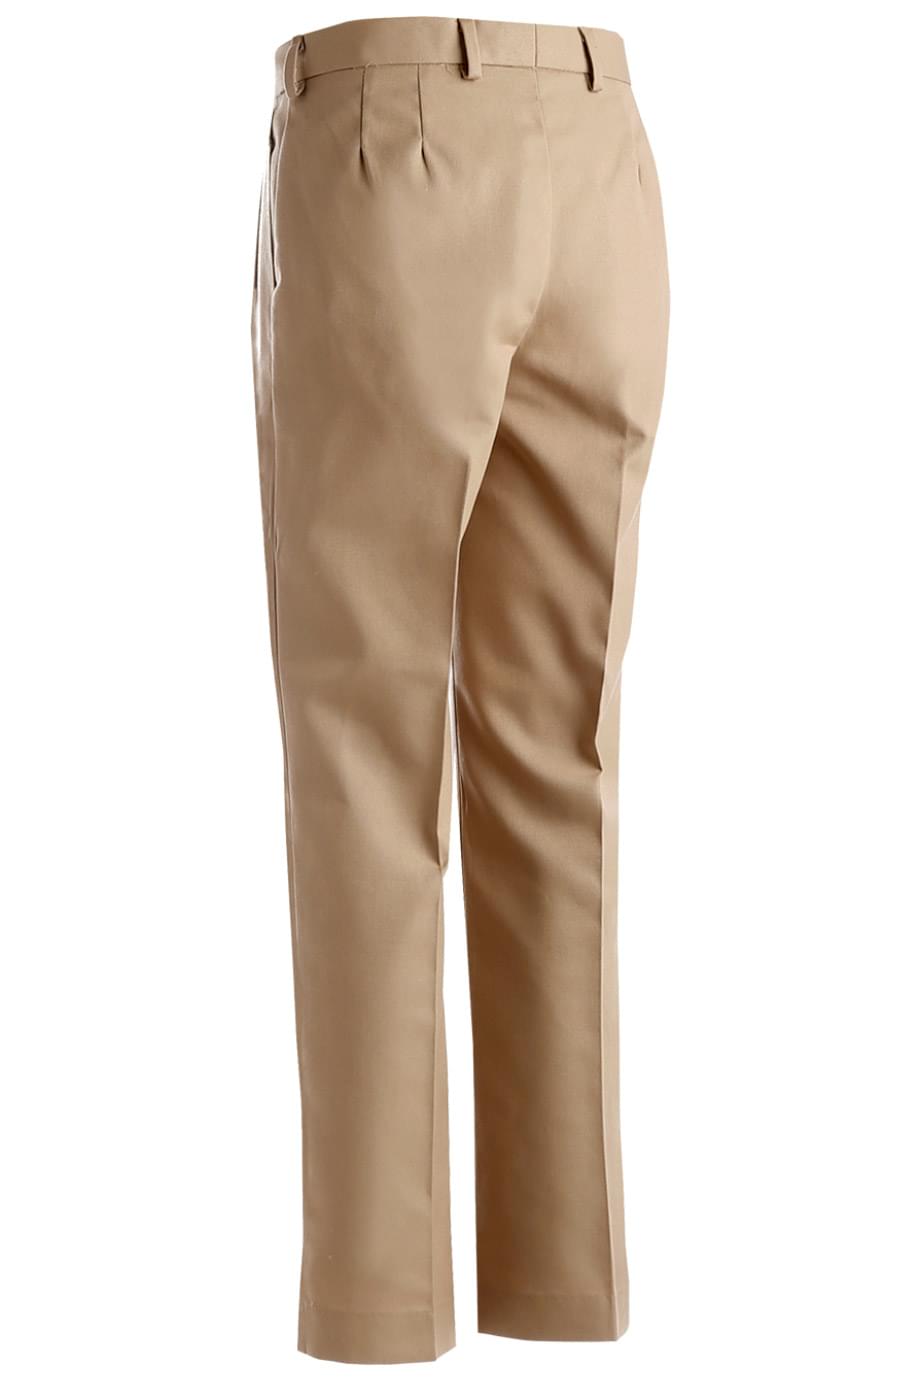 BLENDED CHINO PLEATED FRONT PANT